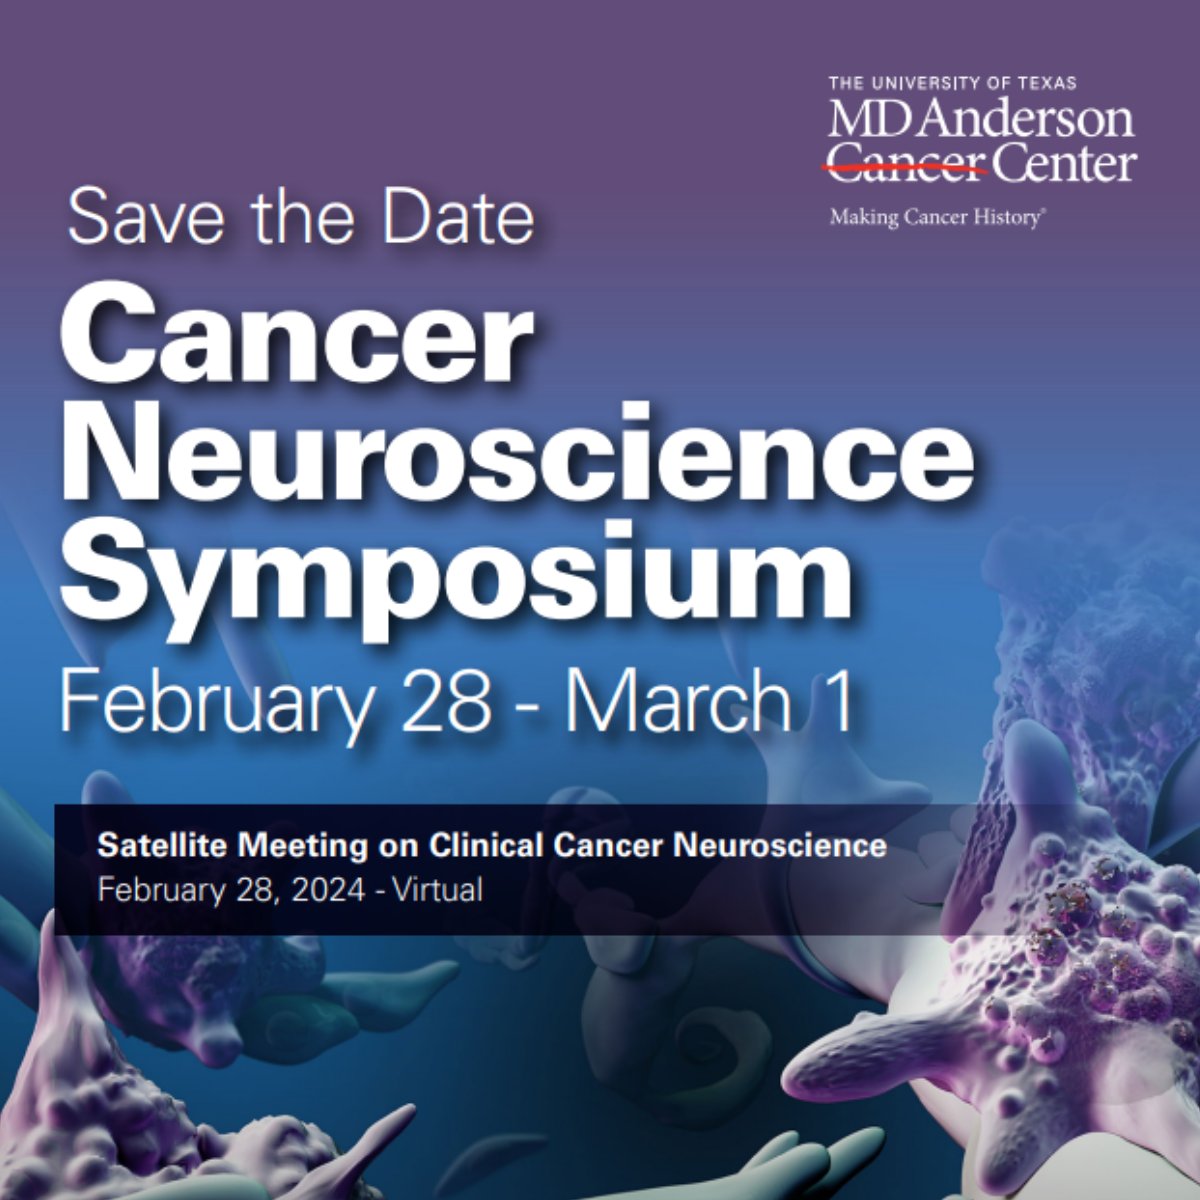 Moran Amit, M.D., Ph.D., from @MDAndersonNews, is organizing the Cancer #Neuroscience Symposium from Feb 28 - Mar 1, 2024. Join us at the symposium to learn from esteemed researchers and professionals in the field. Register now: bit.ly/3SypeXO @CanNeuroSociety